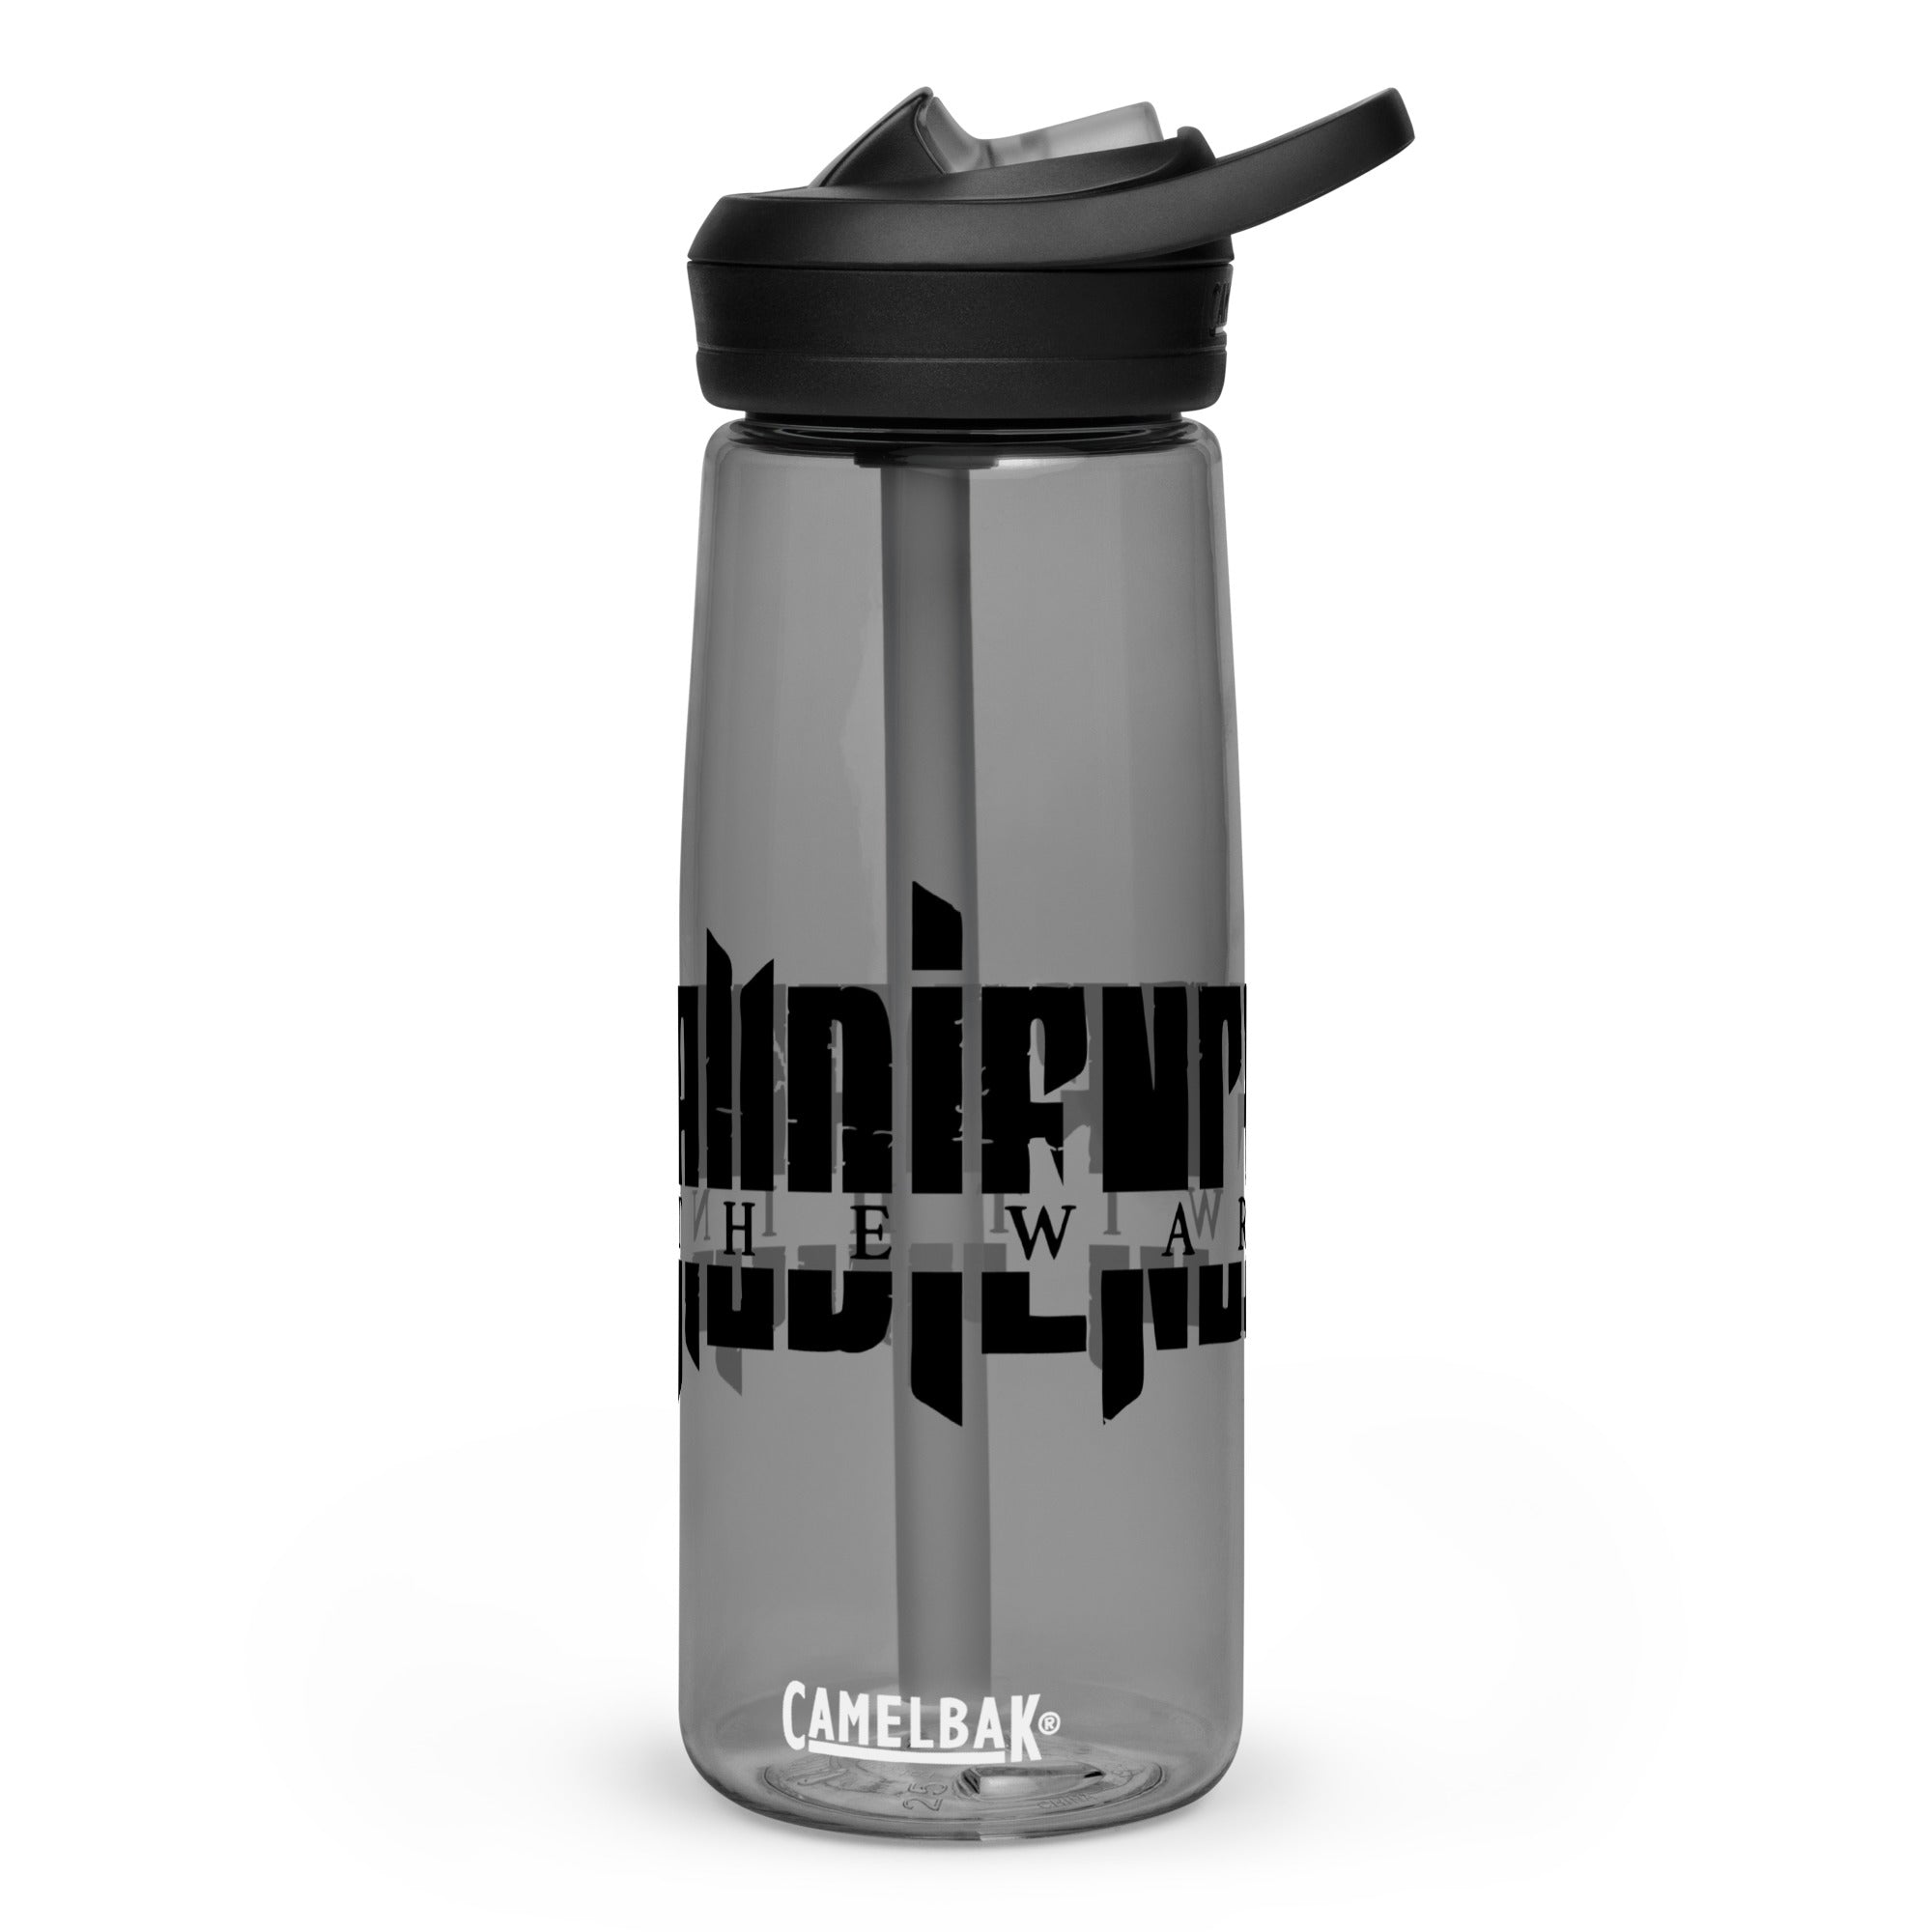 AUDIENCE OF RAIN - THE WAR WITHIN - CAMELBACK® SPORTS WATER BOTTLE